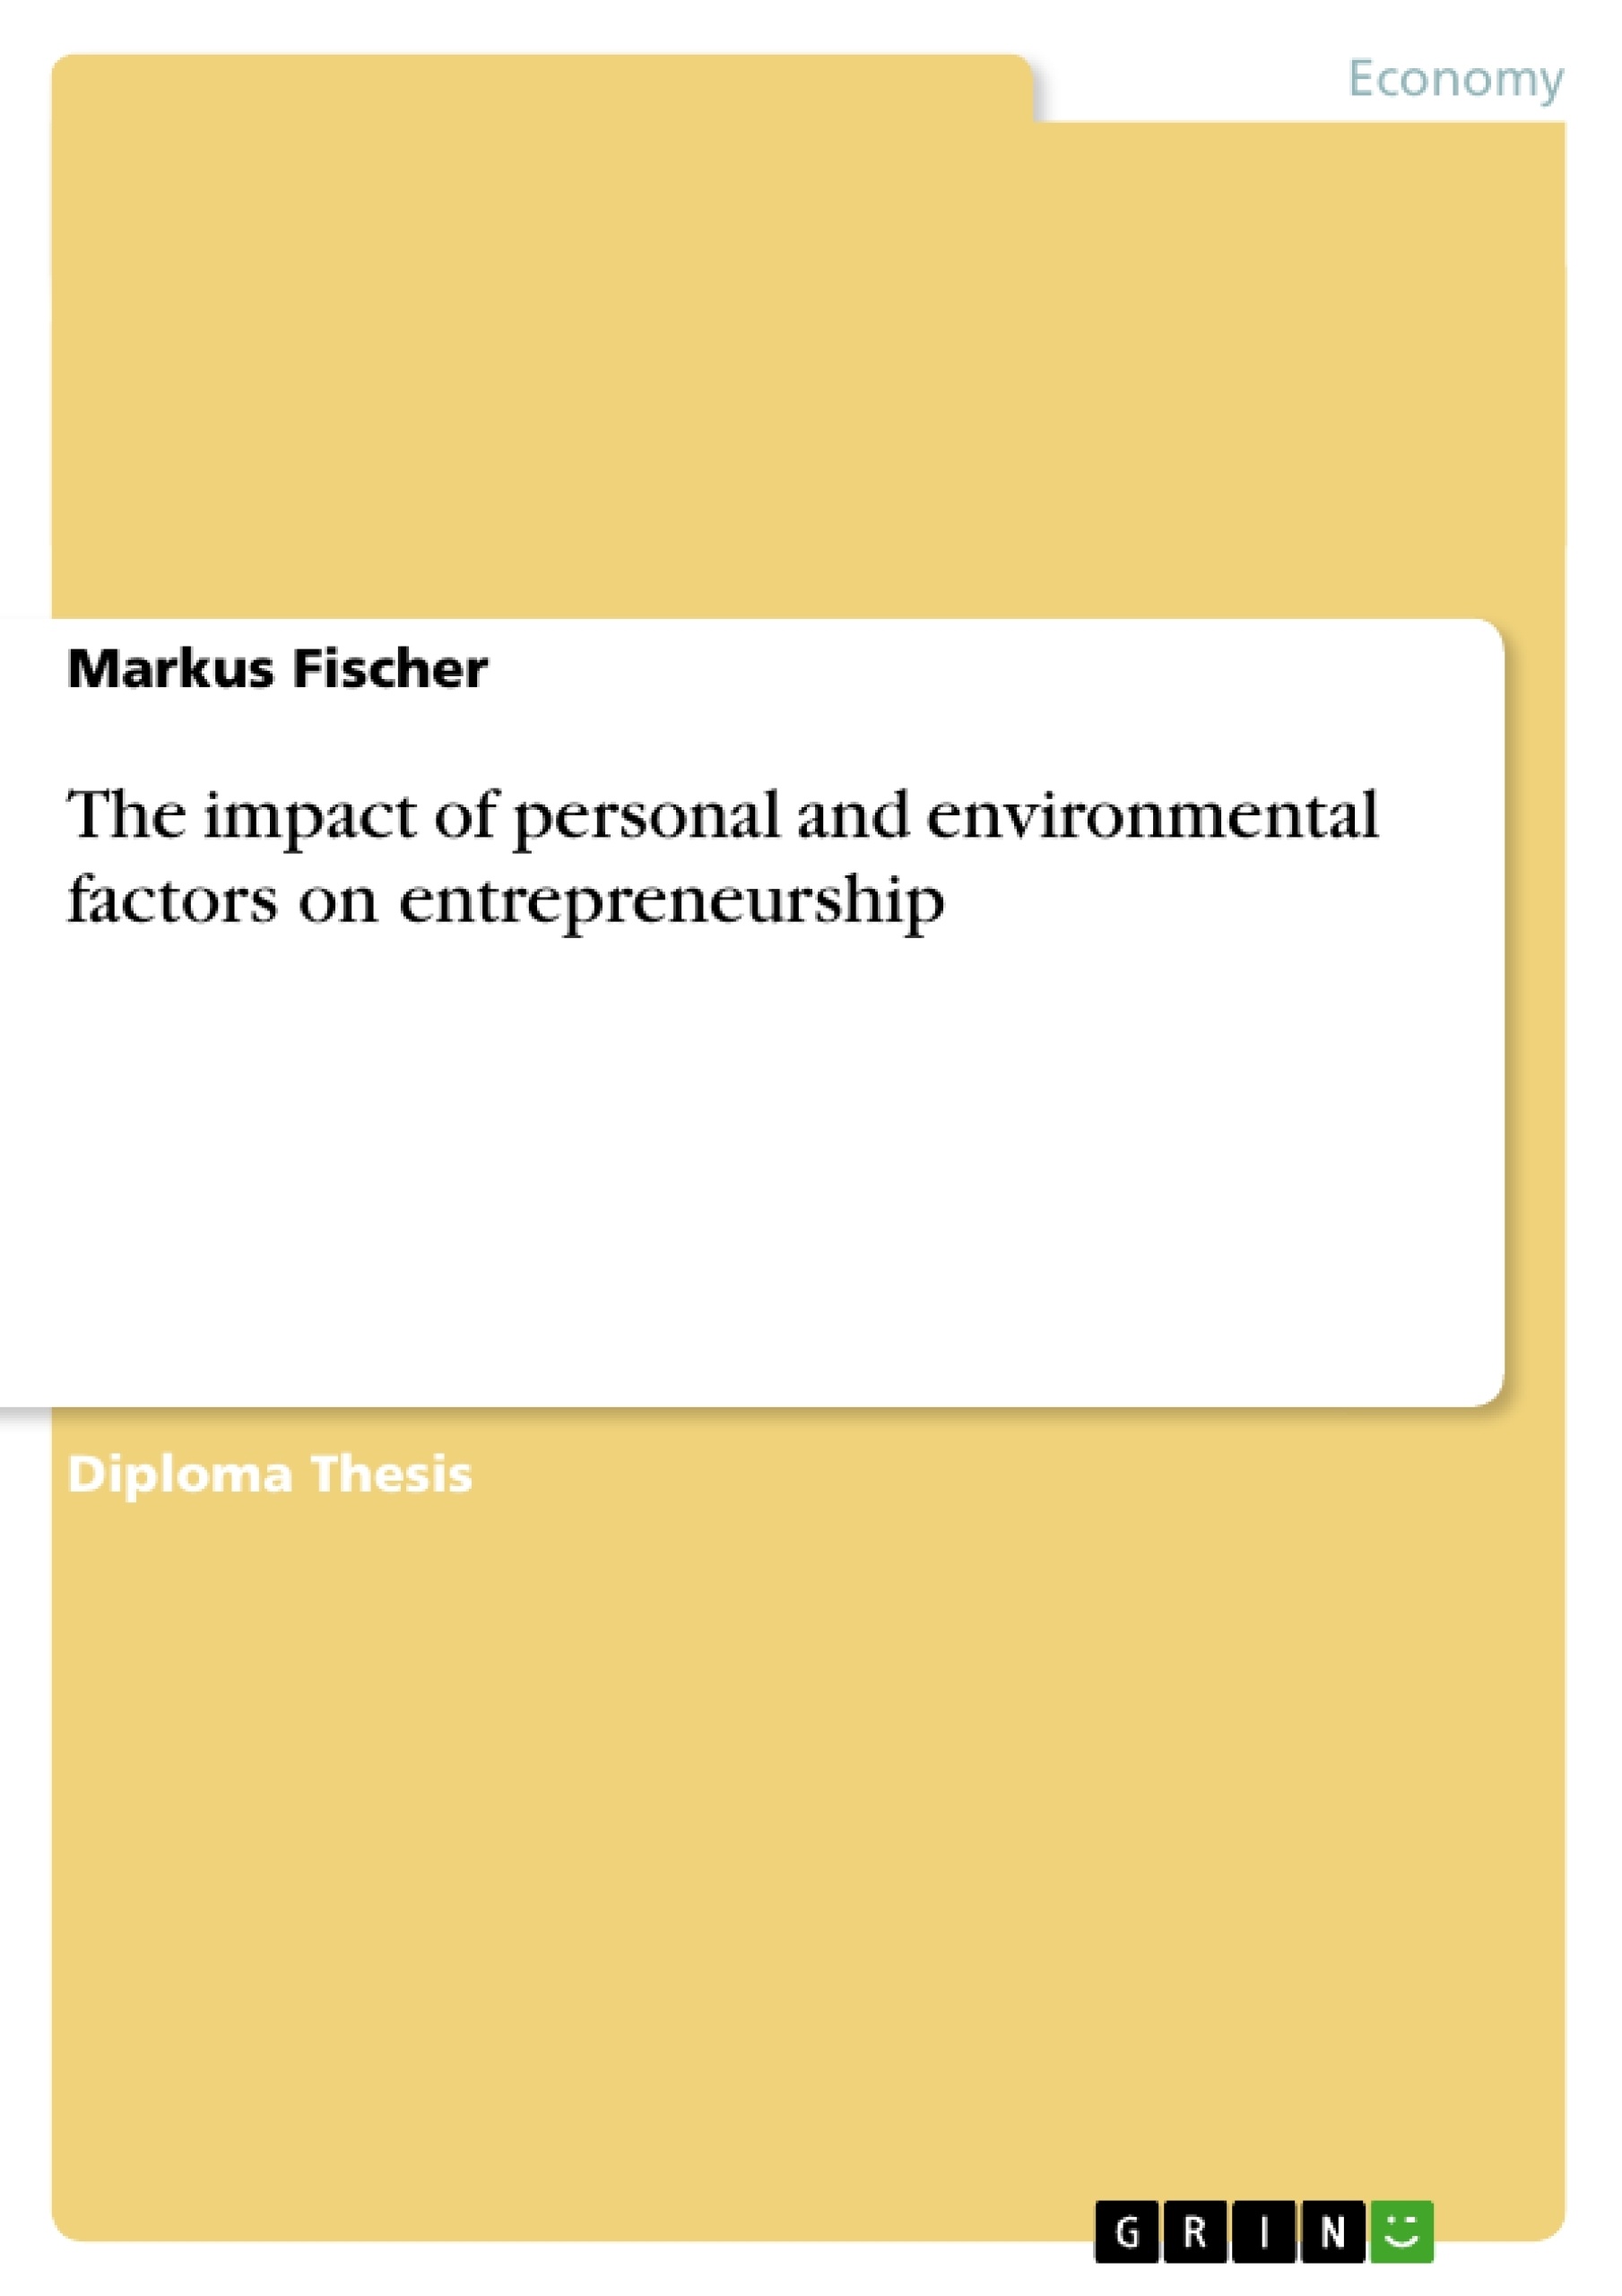 Title: The impact of personal and environmental factors on entrepreneurship